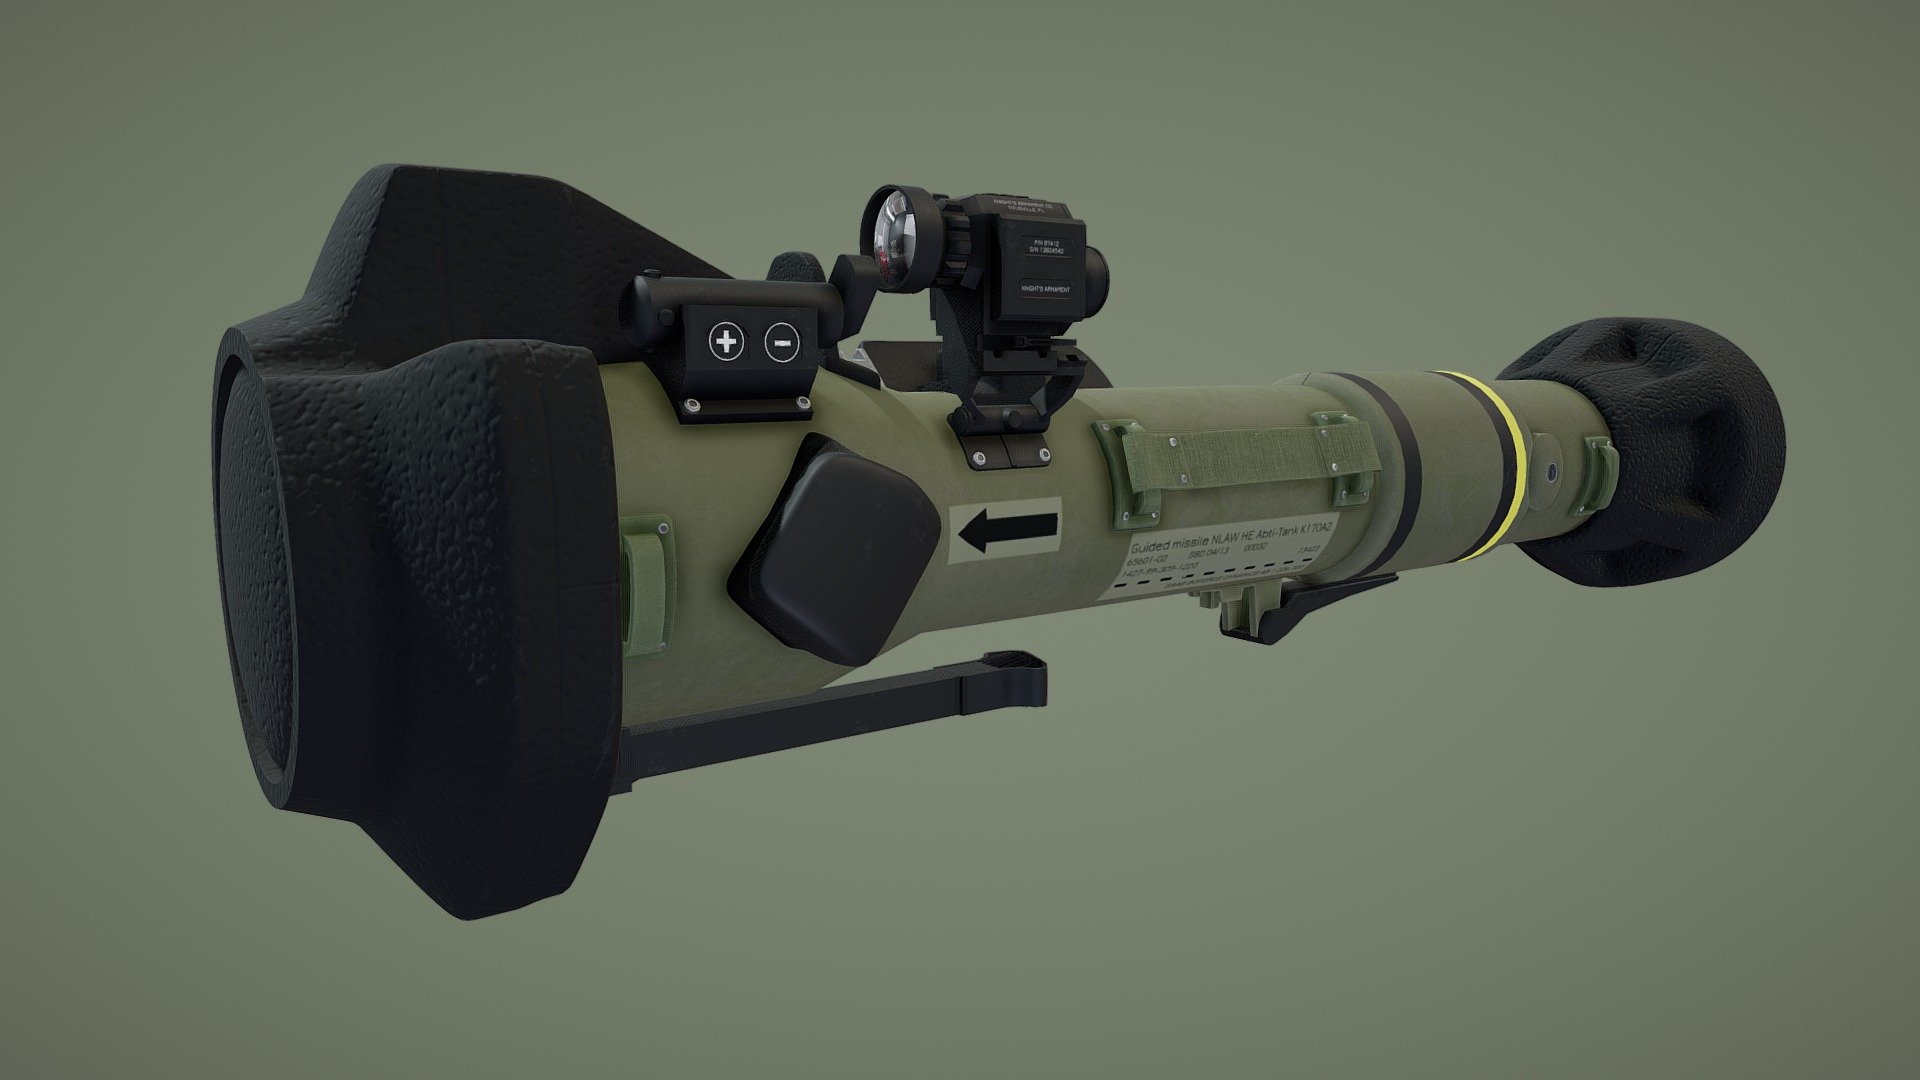 NLAW (Next generation Light Anti-tank Weapon) eliminates even the most advanced tanks. It is best-in-class for dismounted light forces that operate in all environments, including built-up areas 3d model